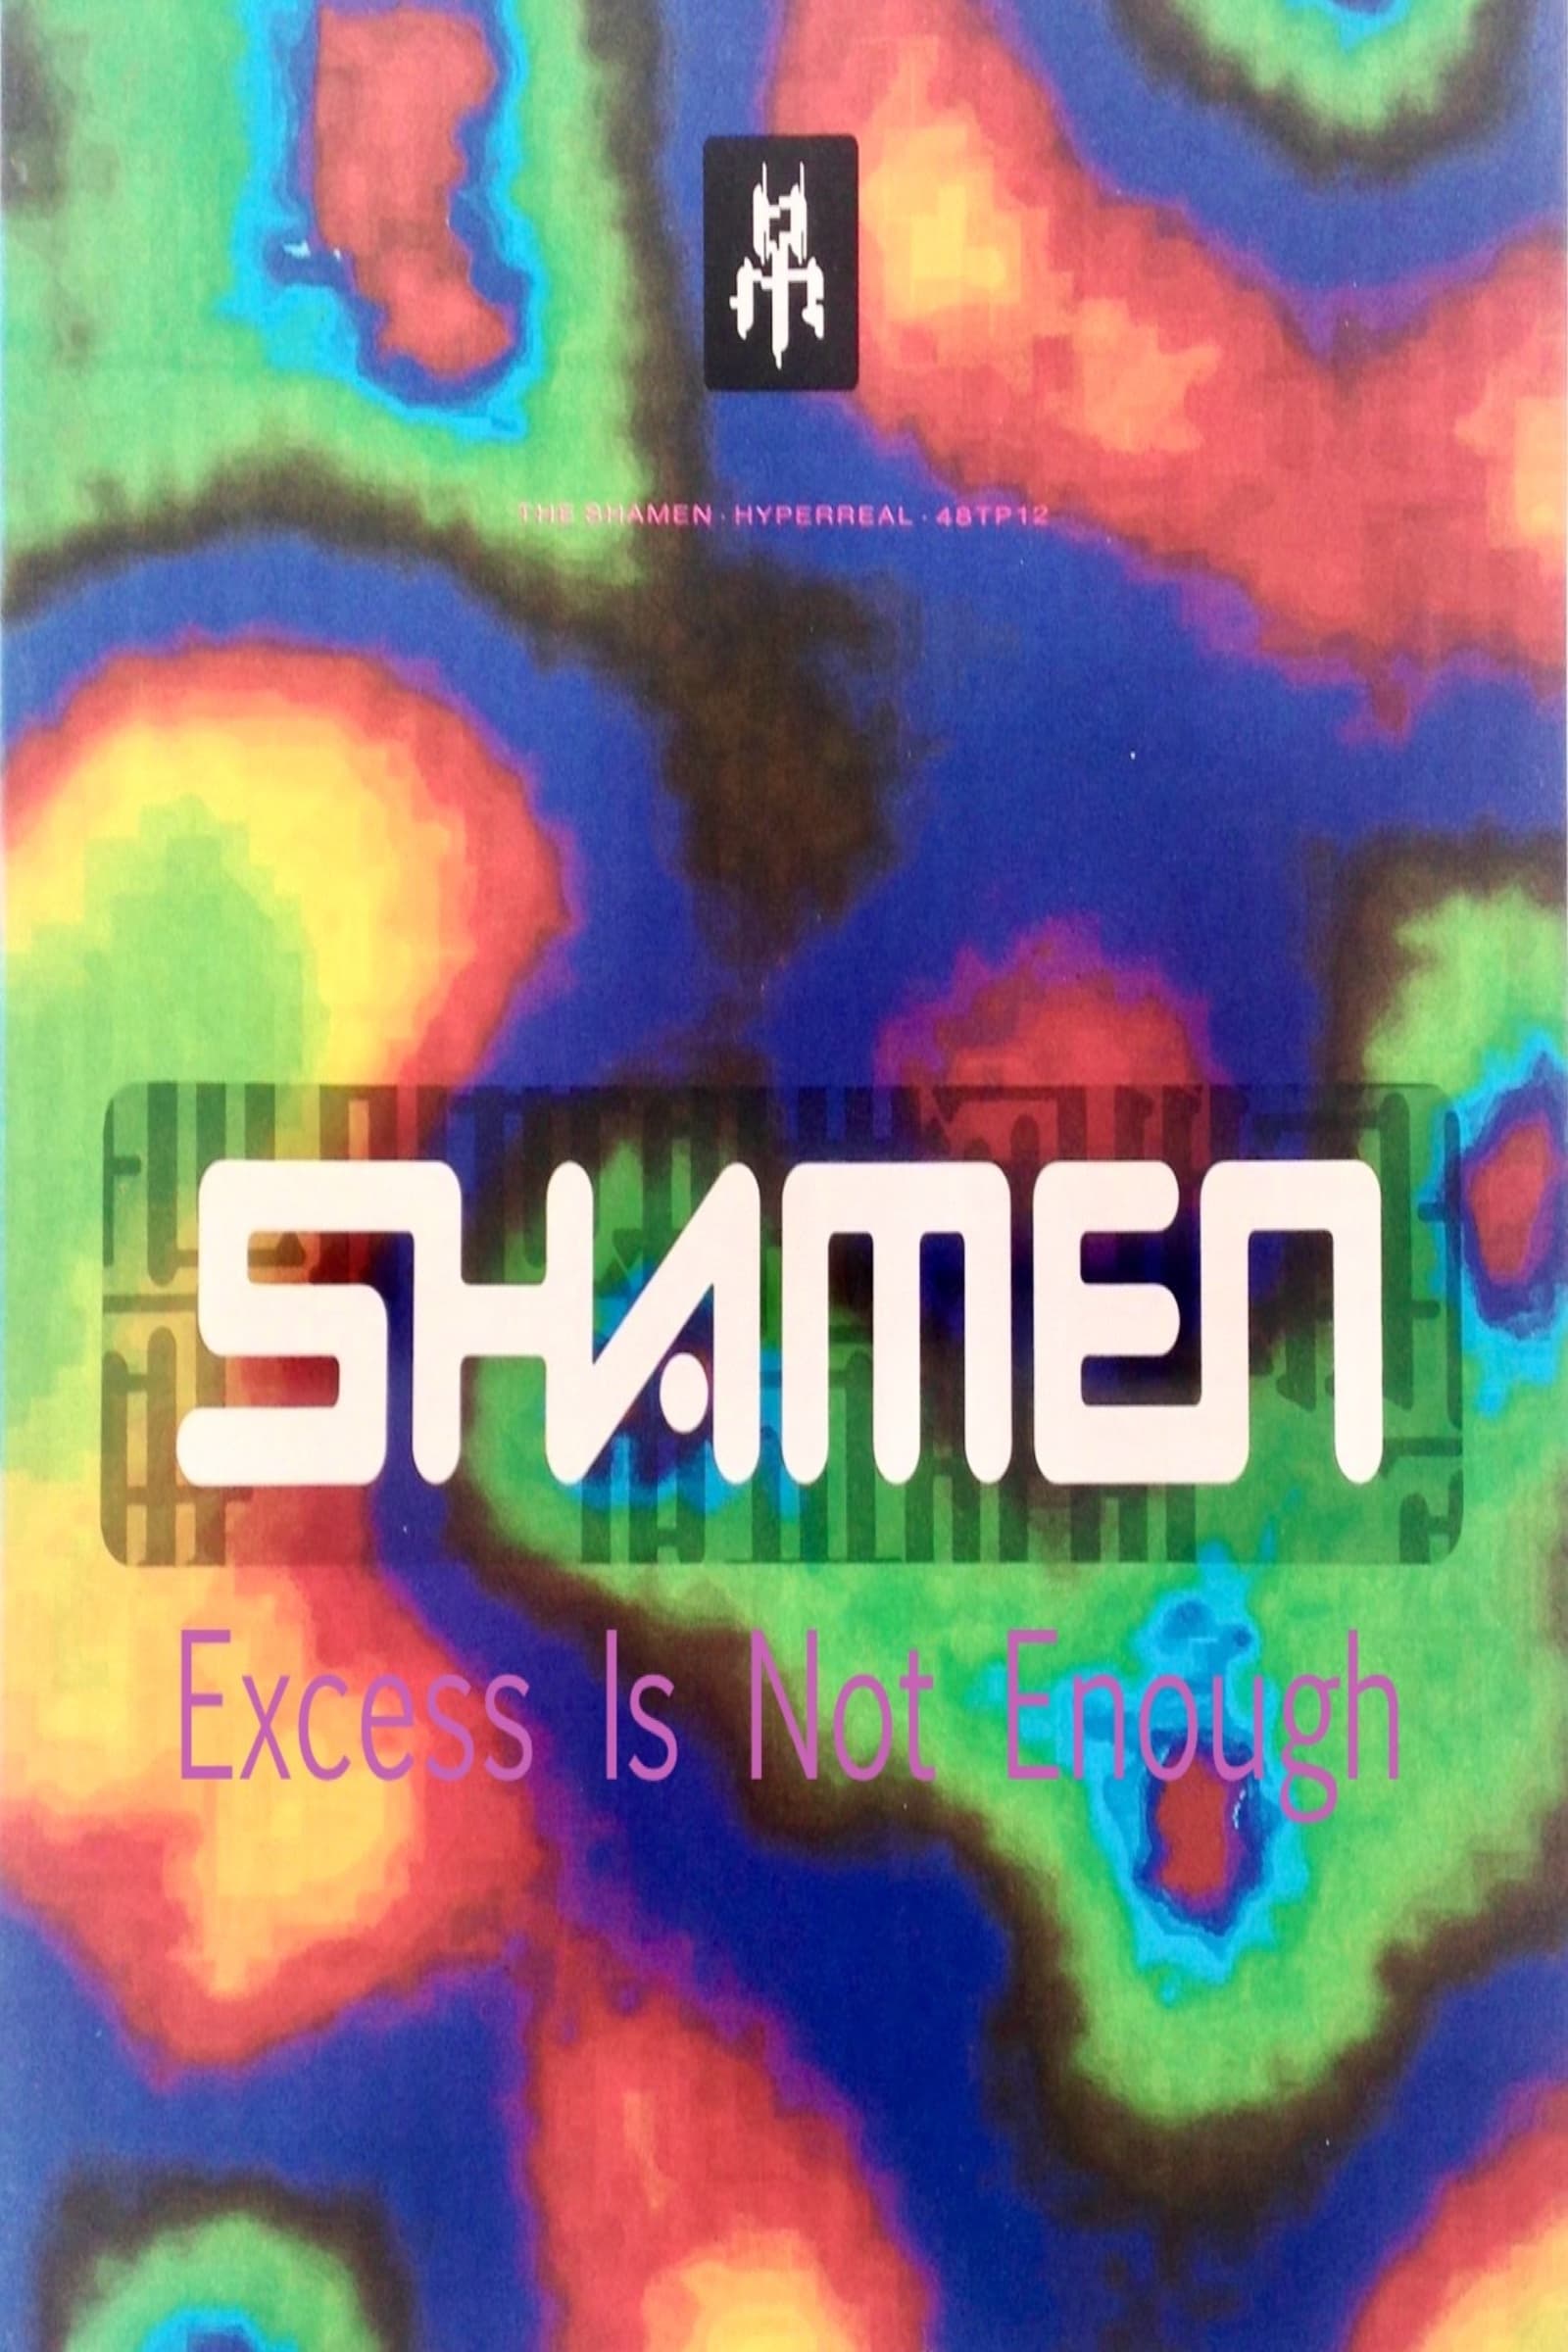 The Shamen - excess is not enough